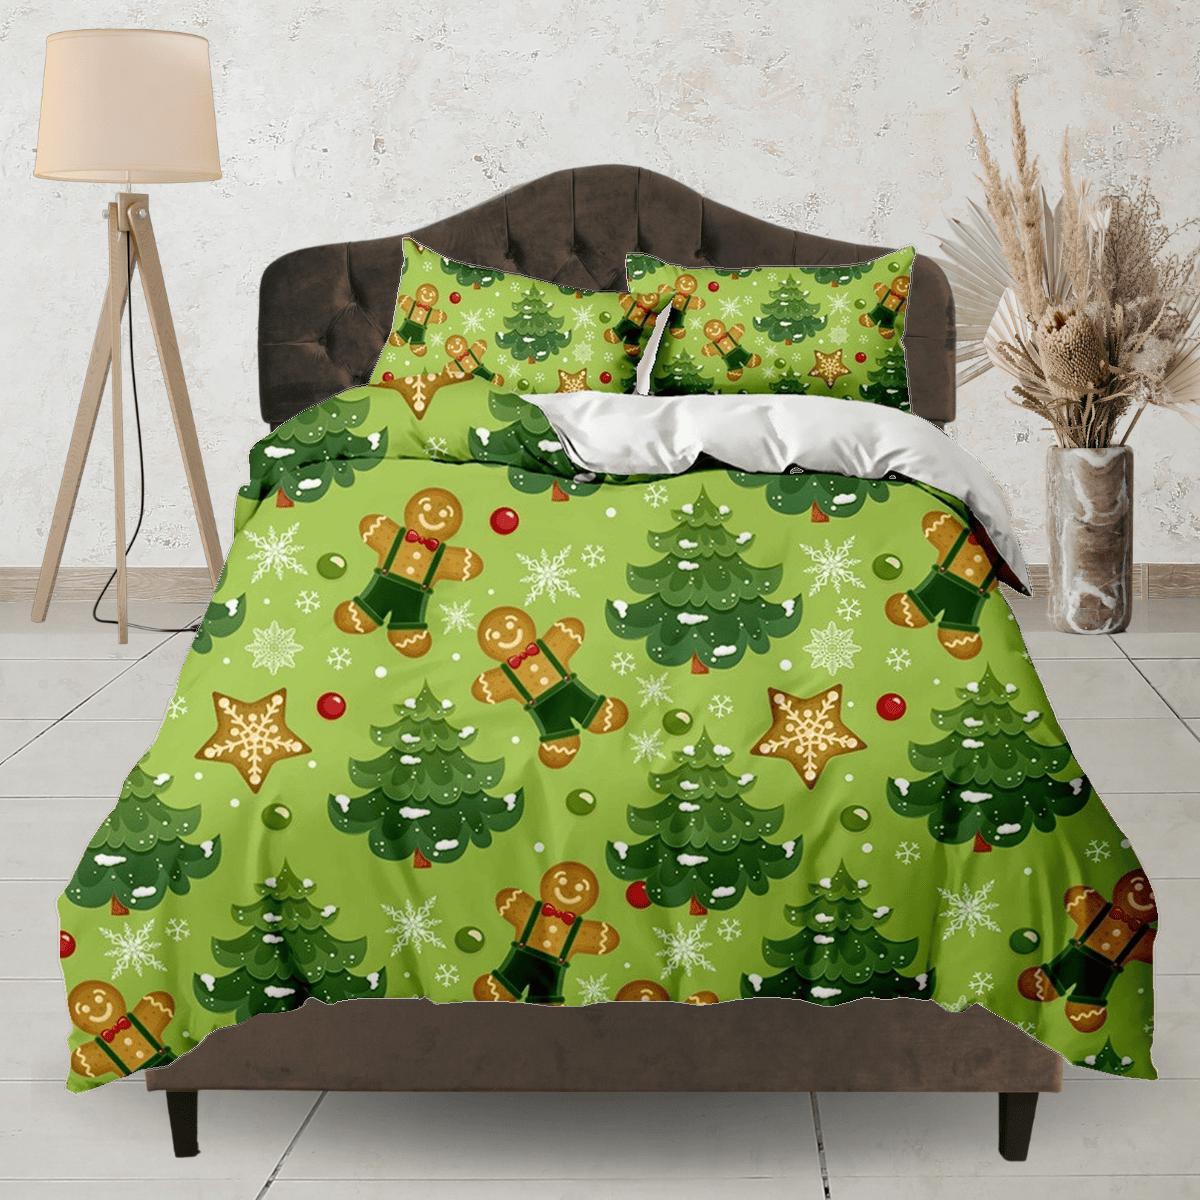 daintyduvet Gingerbread Christmas tree bedding & pillowcase holiday gift green duvet cover king queen full twin toddler bedding baby Christmas farmhouse